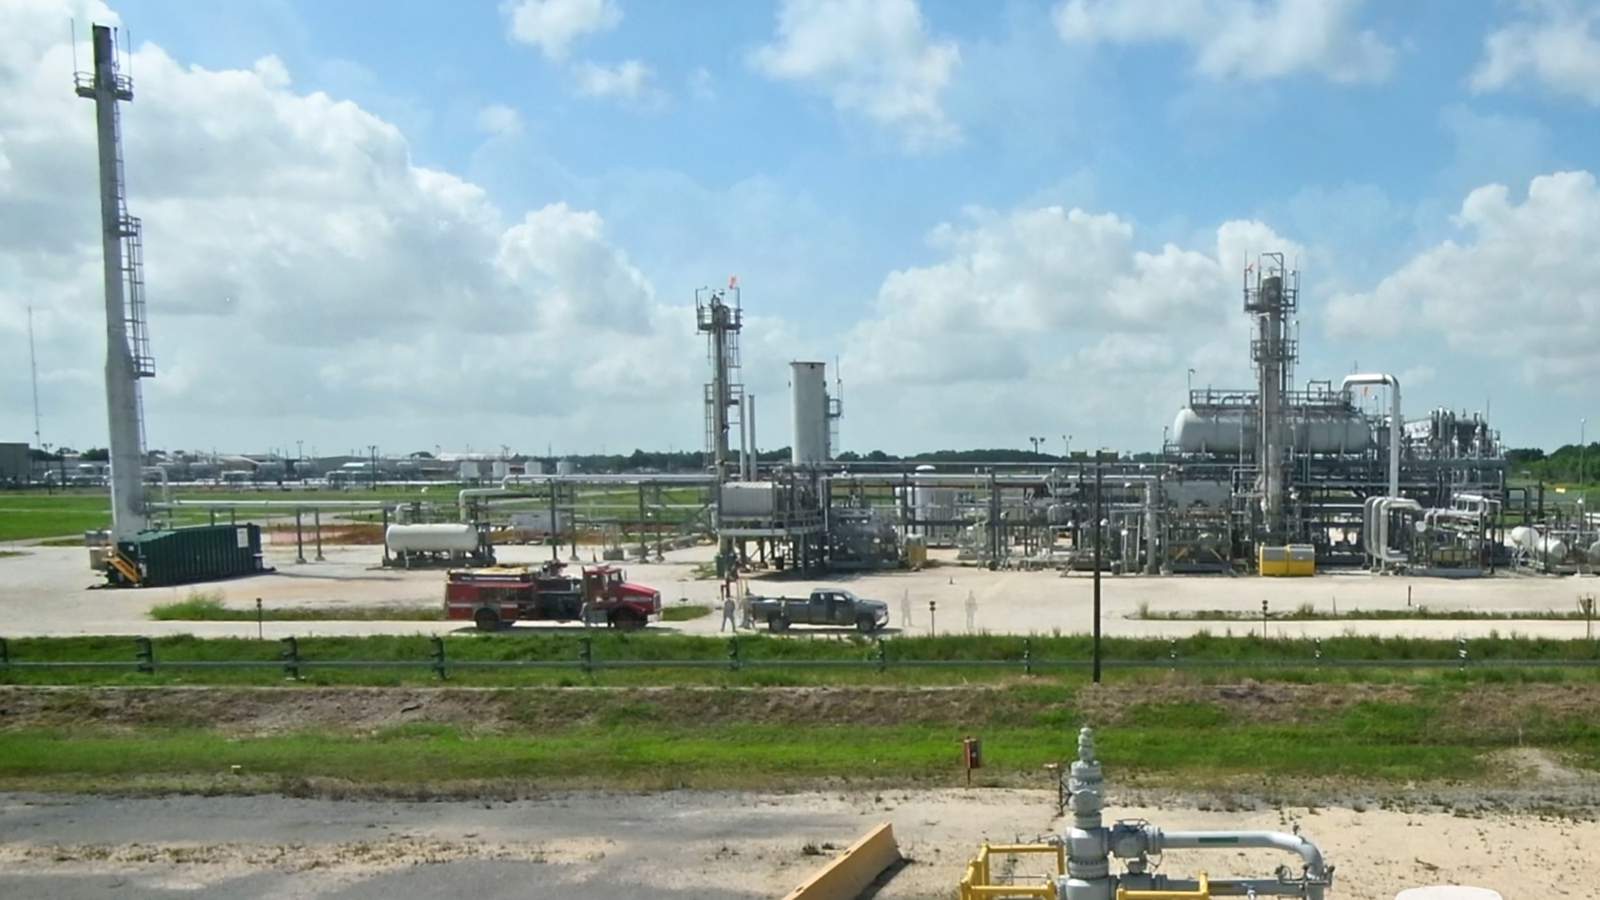 Hurricane hit oil storage site, but no shortages expected